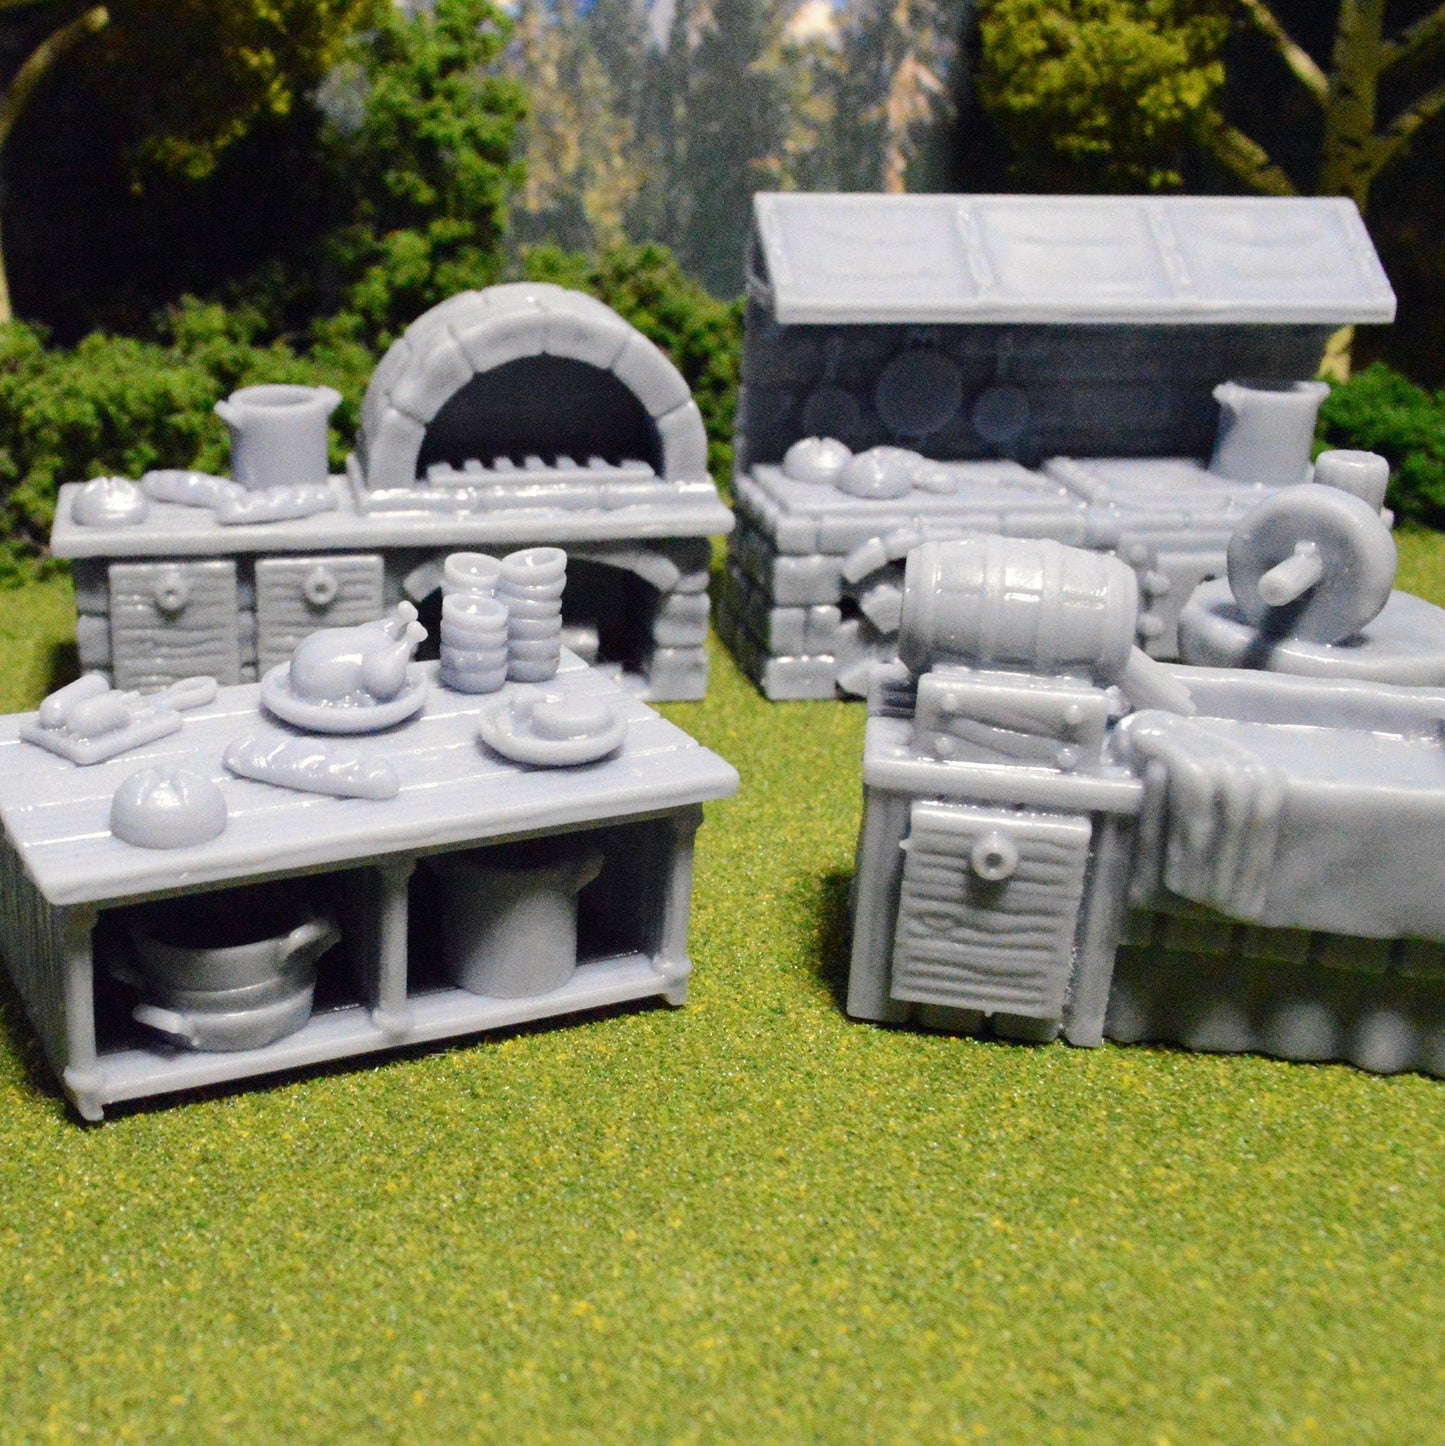 Miniature Kitchen Furniture and Food 28mm for D&D Terrain, DnD Pathfinder Diorama Tavern Inn Oven Stove Shelves Dishes